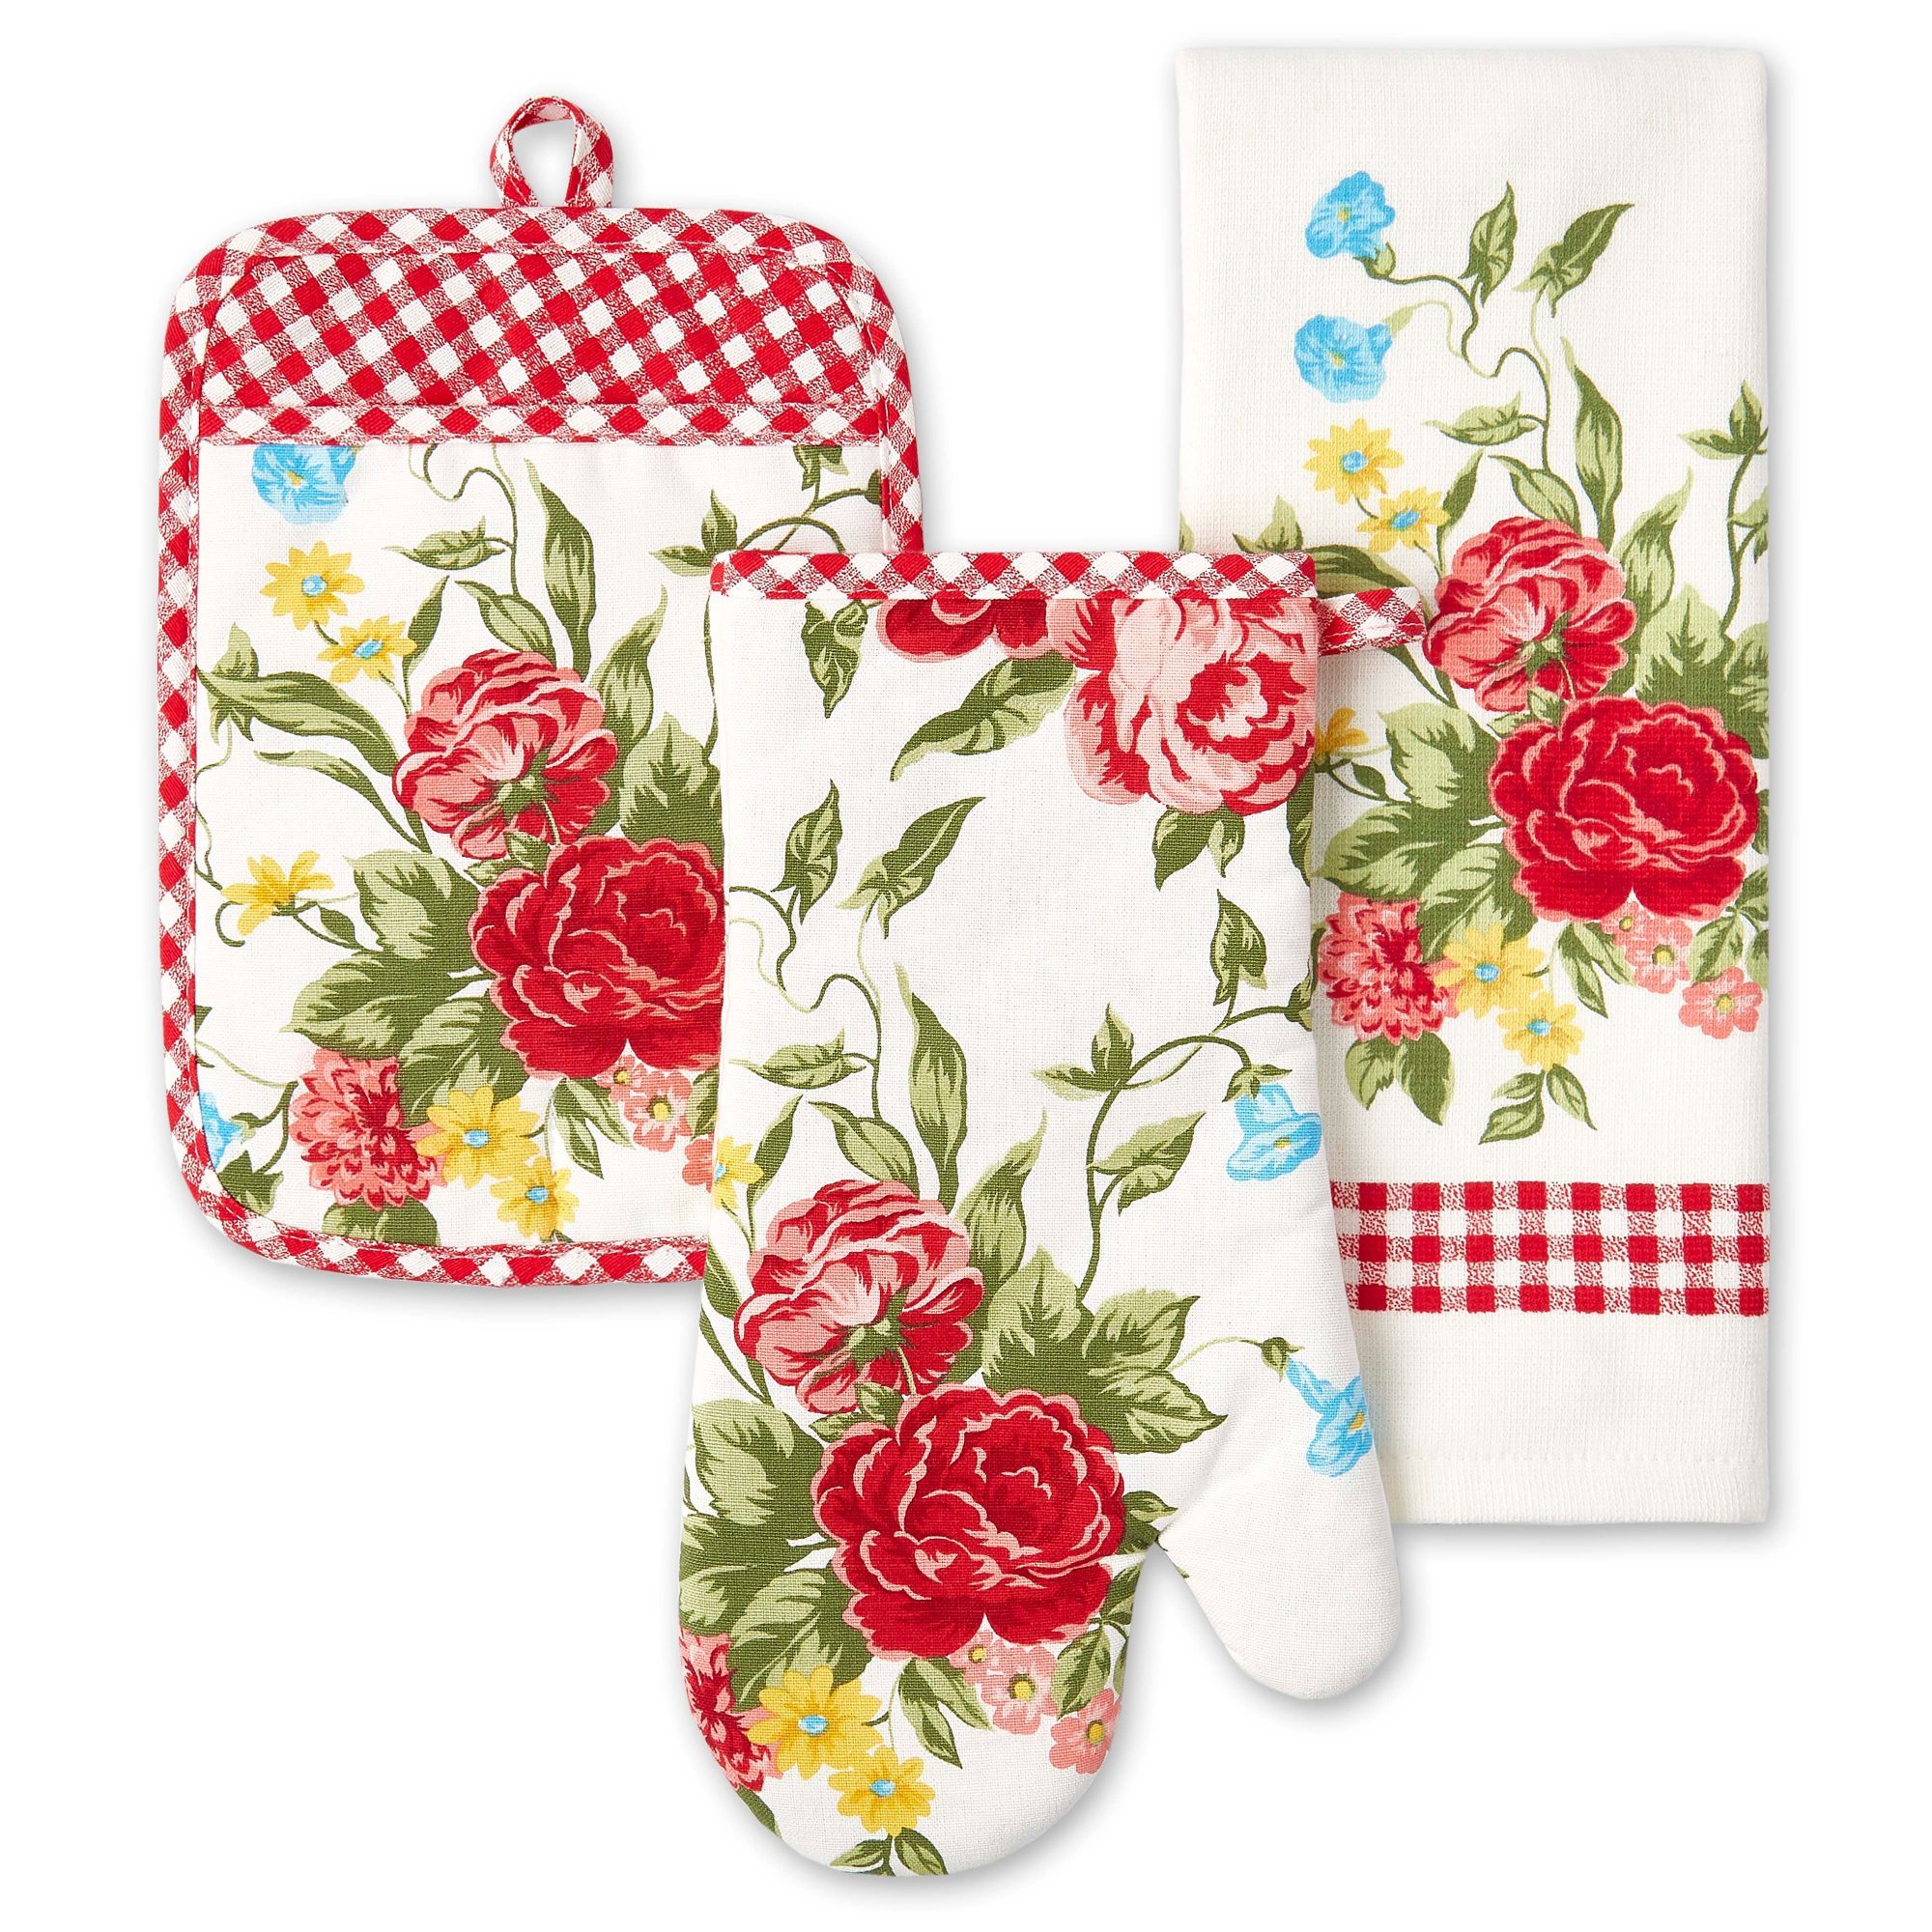 The Pioneer Woman Sweet Rose Kitchen Towel, Oven Mitt, Pot Holder, Multicolor, 16